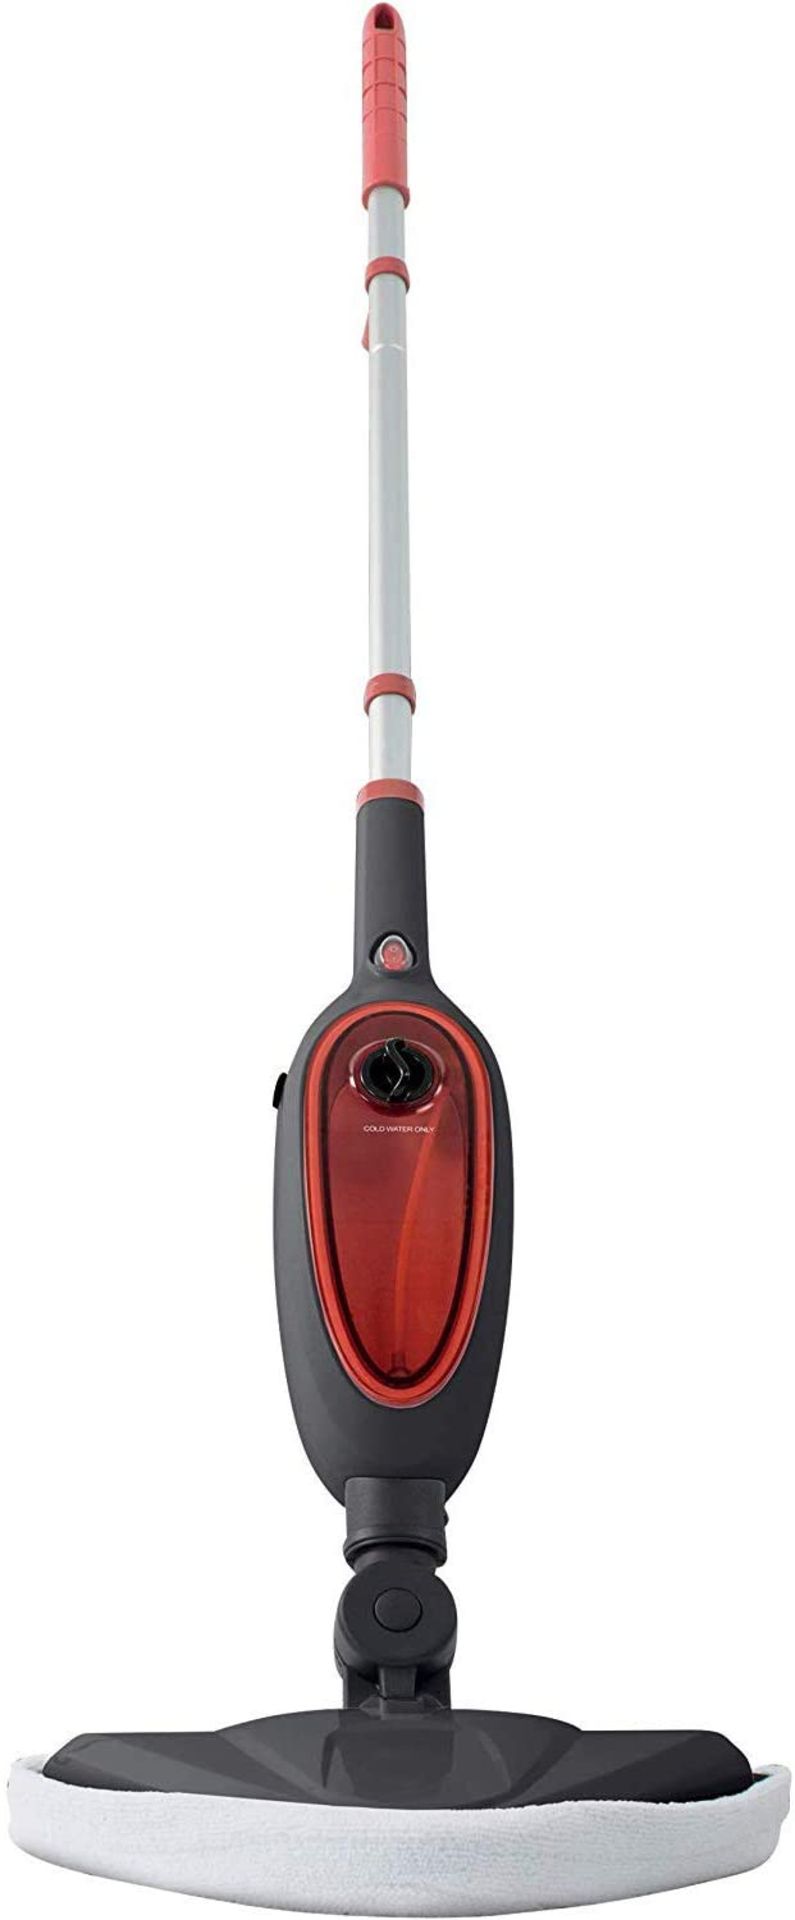 SPEAR & JACKSON 12 IN 1 STEAM MOP RRP £39.99Condition ReportAppraisal Available on Request - All